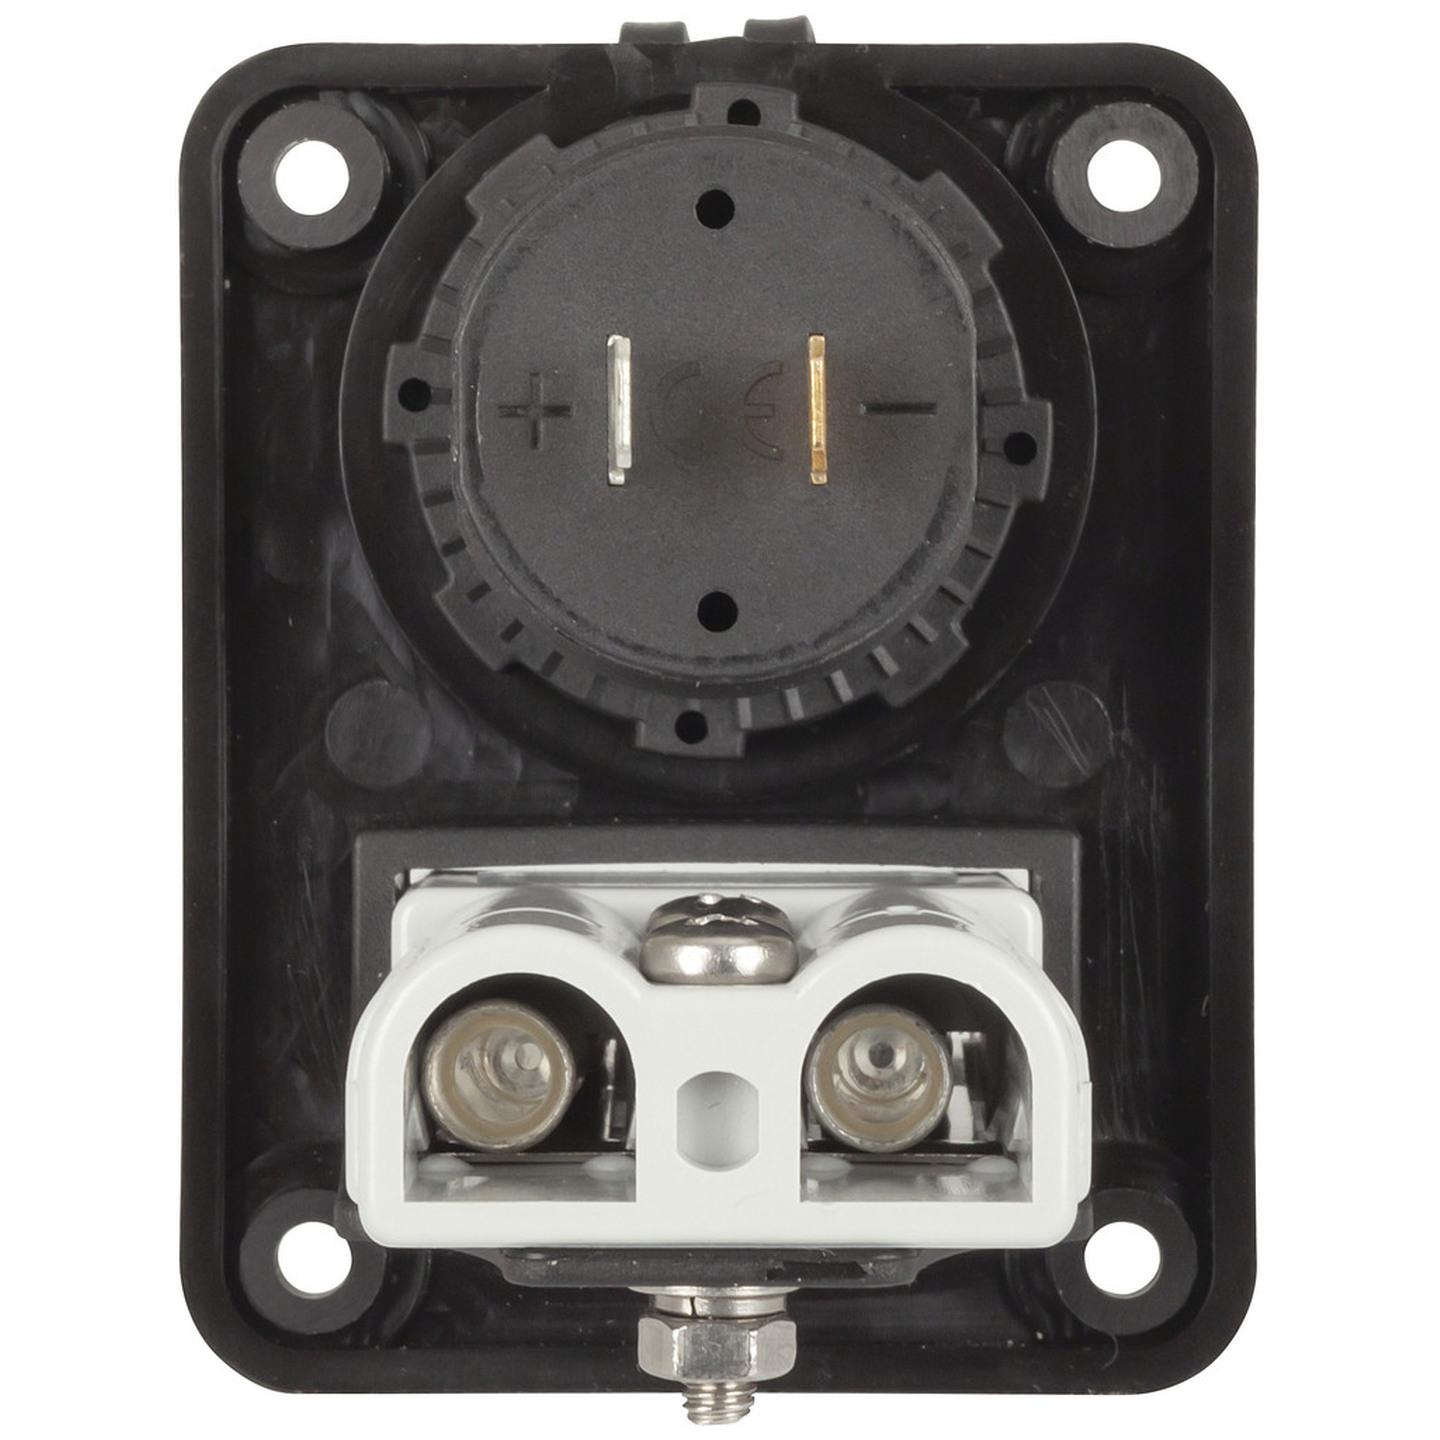 Panel Mount with High Current 50A Connector and USB Socket